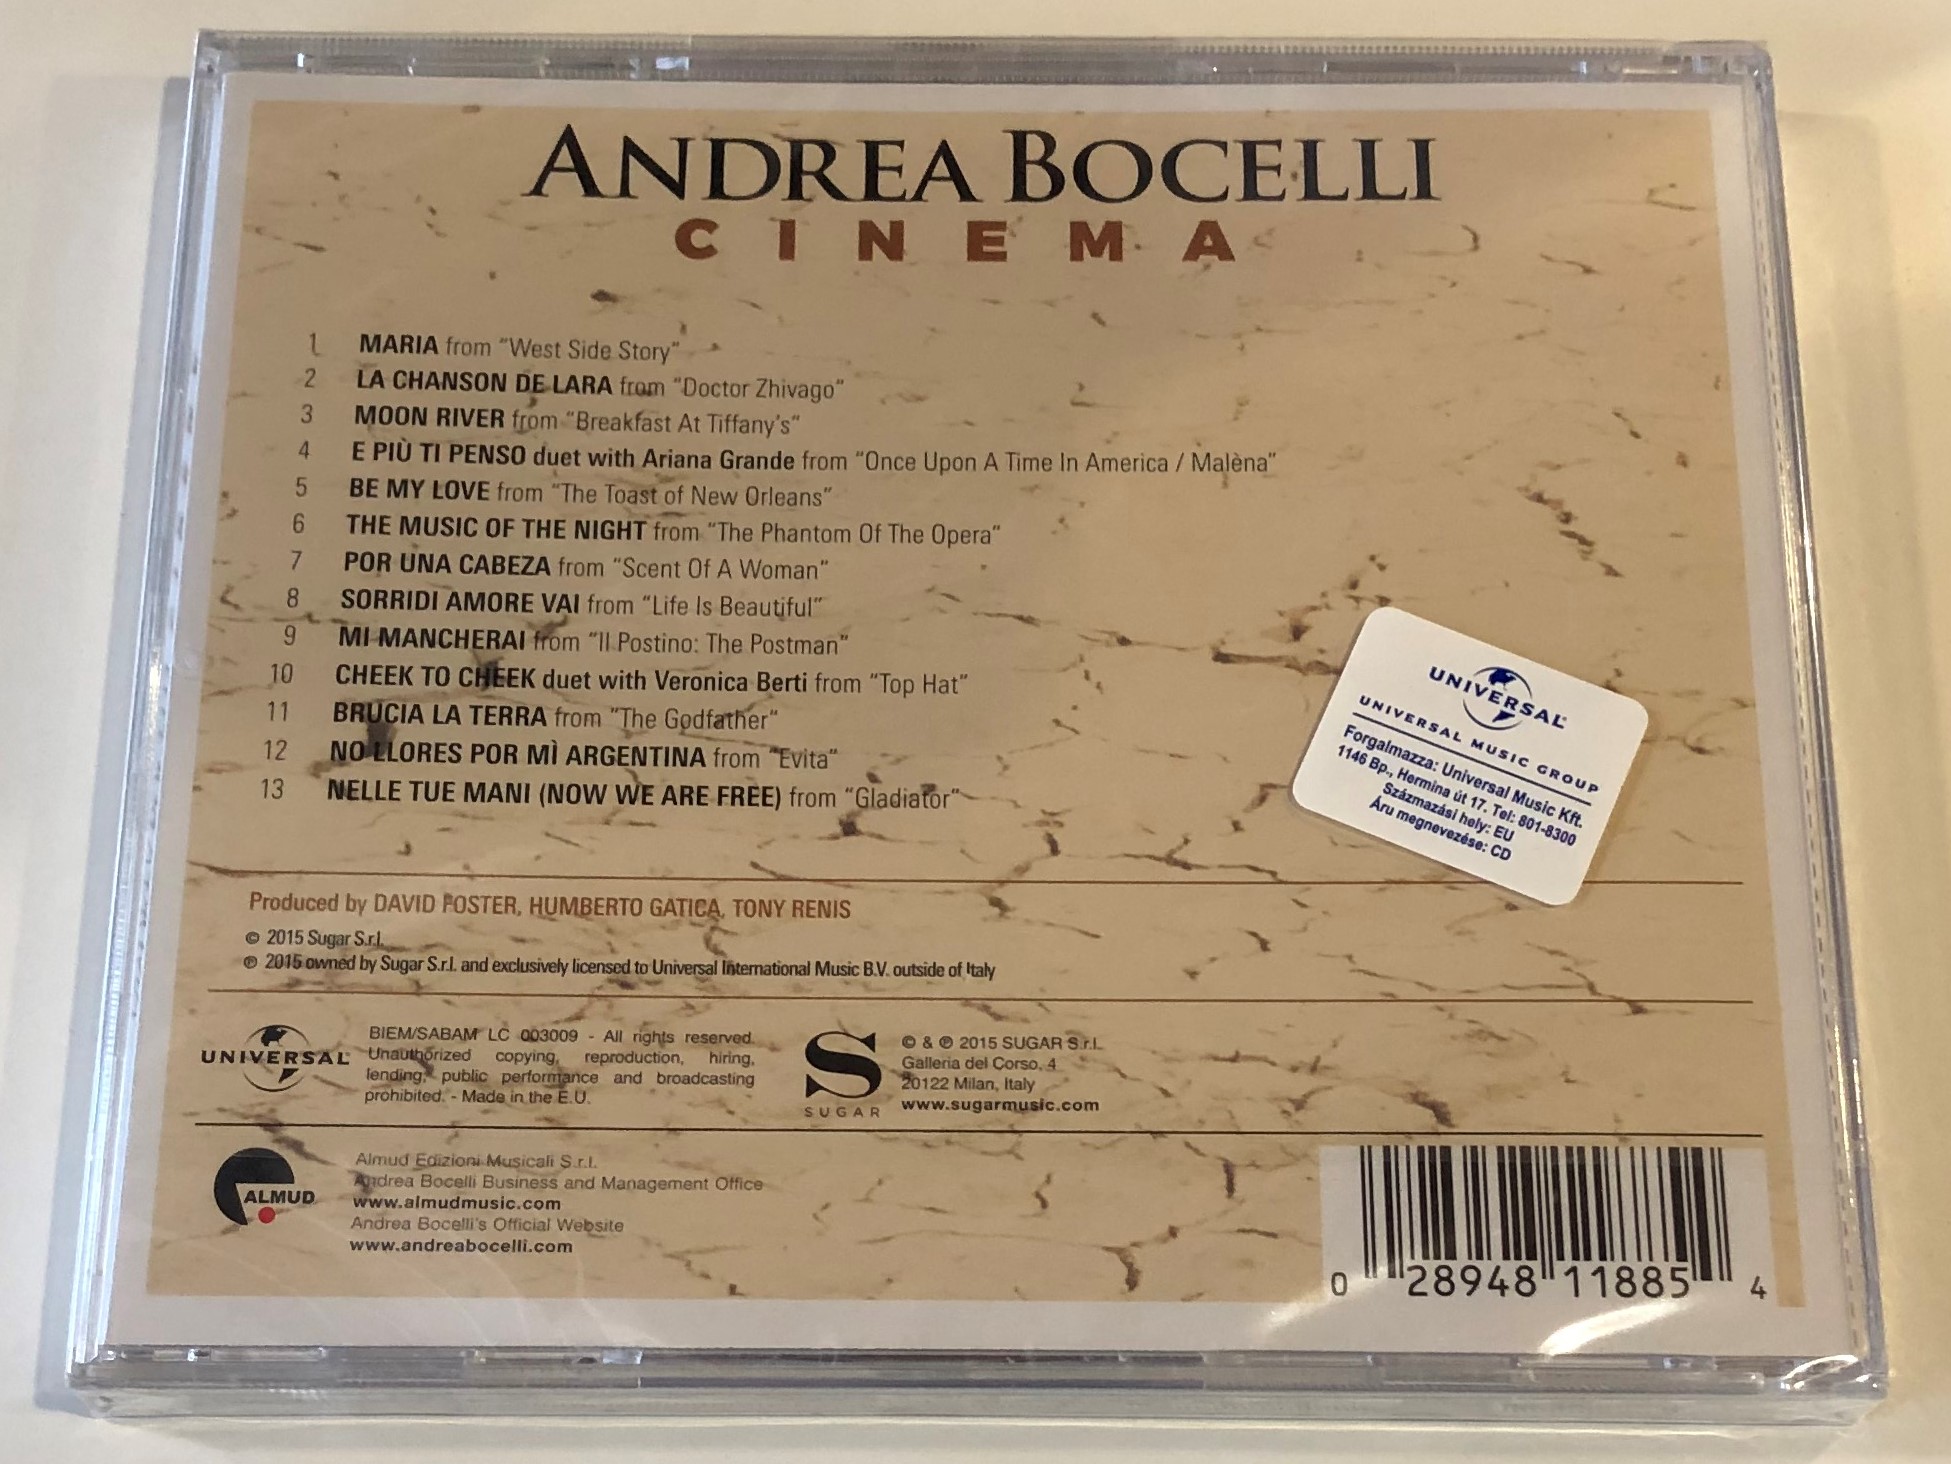 andrea-bocelli-cinema-features-stunning-new-arrangements-of-songs-from-the-world-s-greatest-movies-including-gladiator-west-side-story-breakfast-at-tiffany-s-evita-the-godfather-sugar-a.jpg